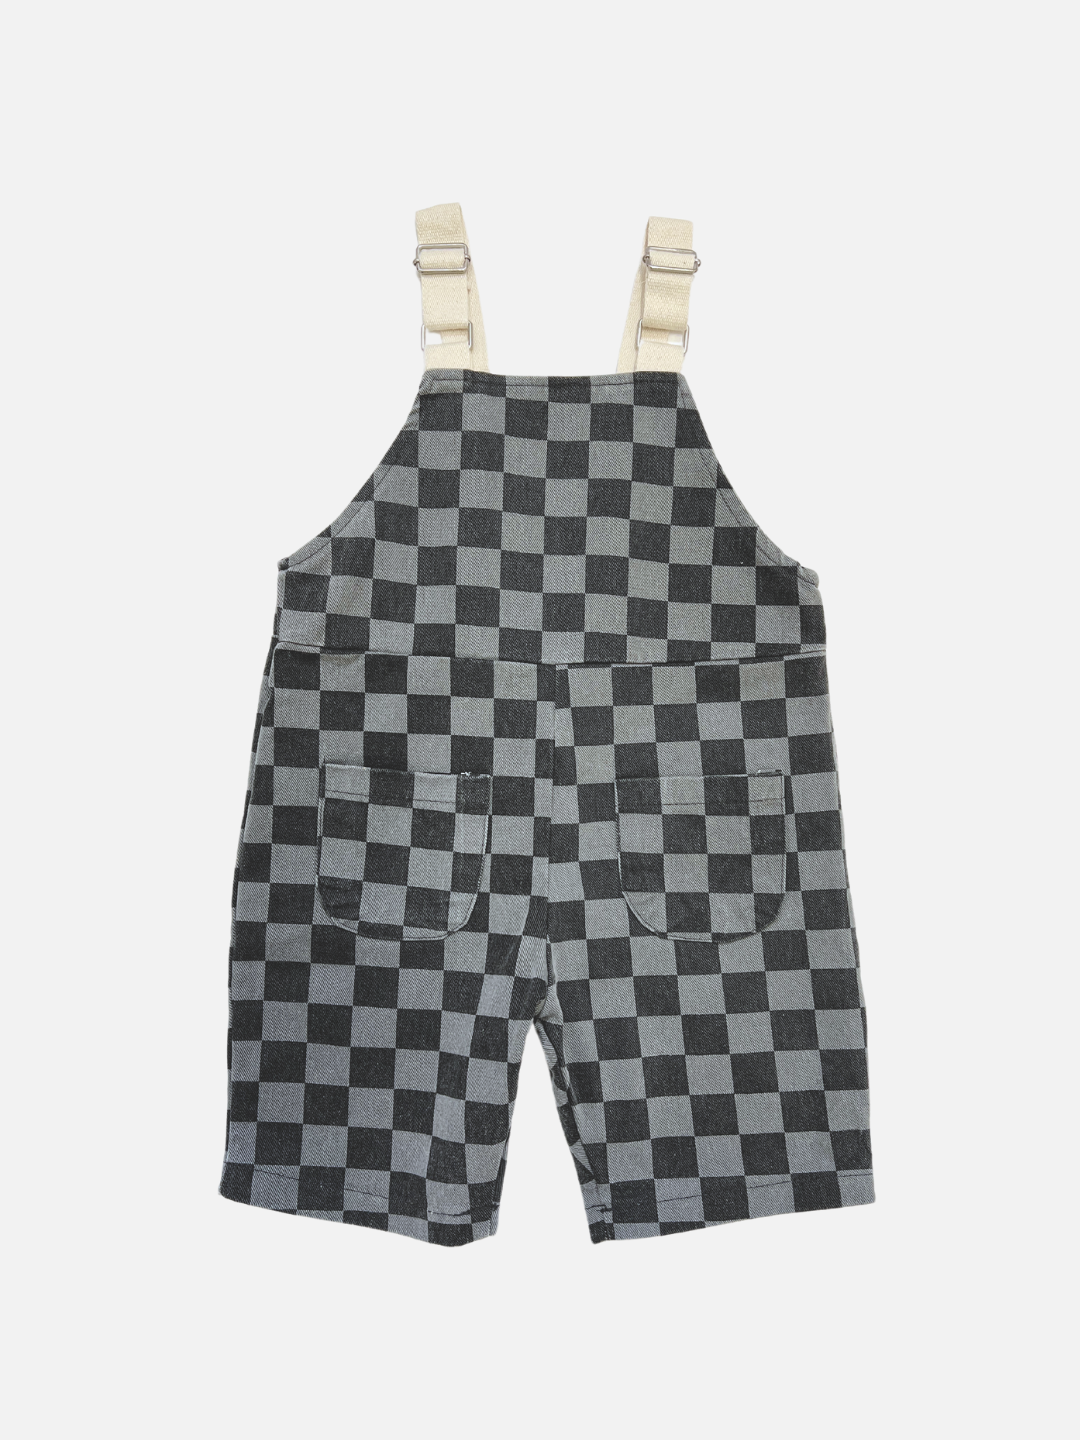 Charcoal | A front view of the kid's pull-on checker overalls in charcoal